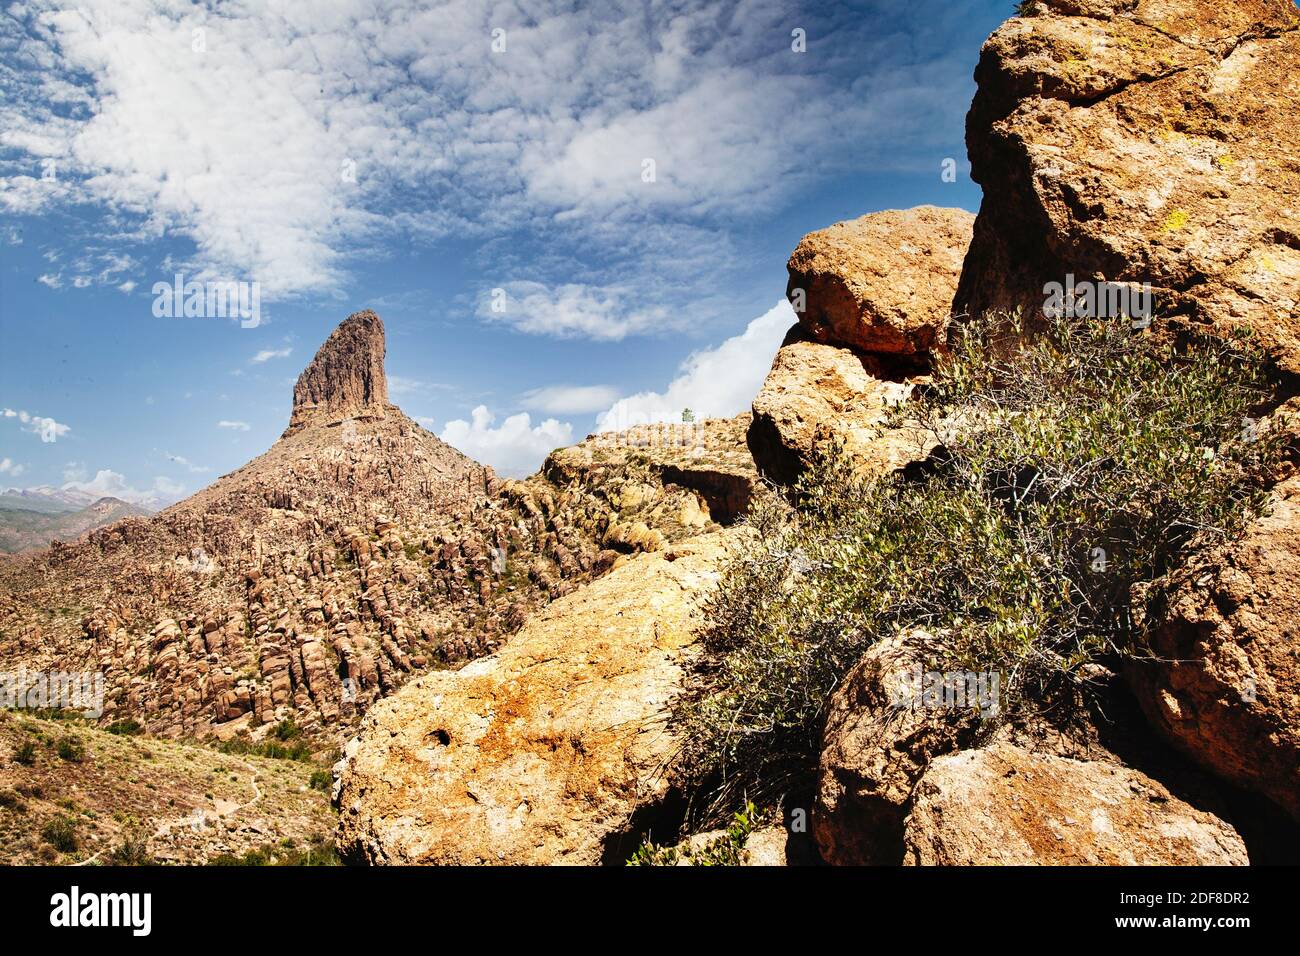 Weavers Needle rises high into the sky in the Superstition Mountains of Arizona. Stock Photo